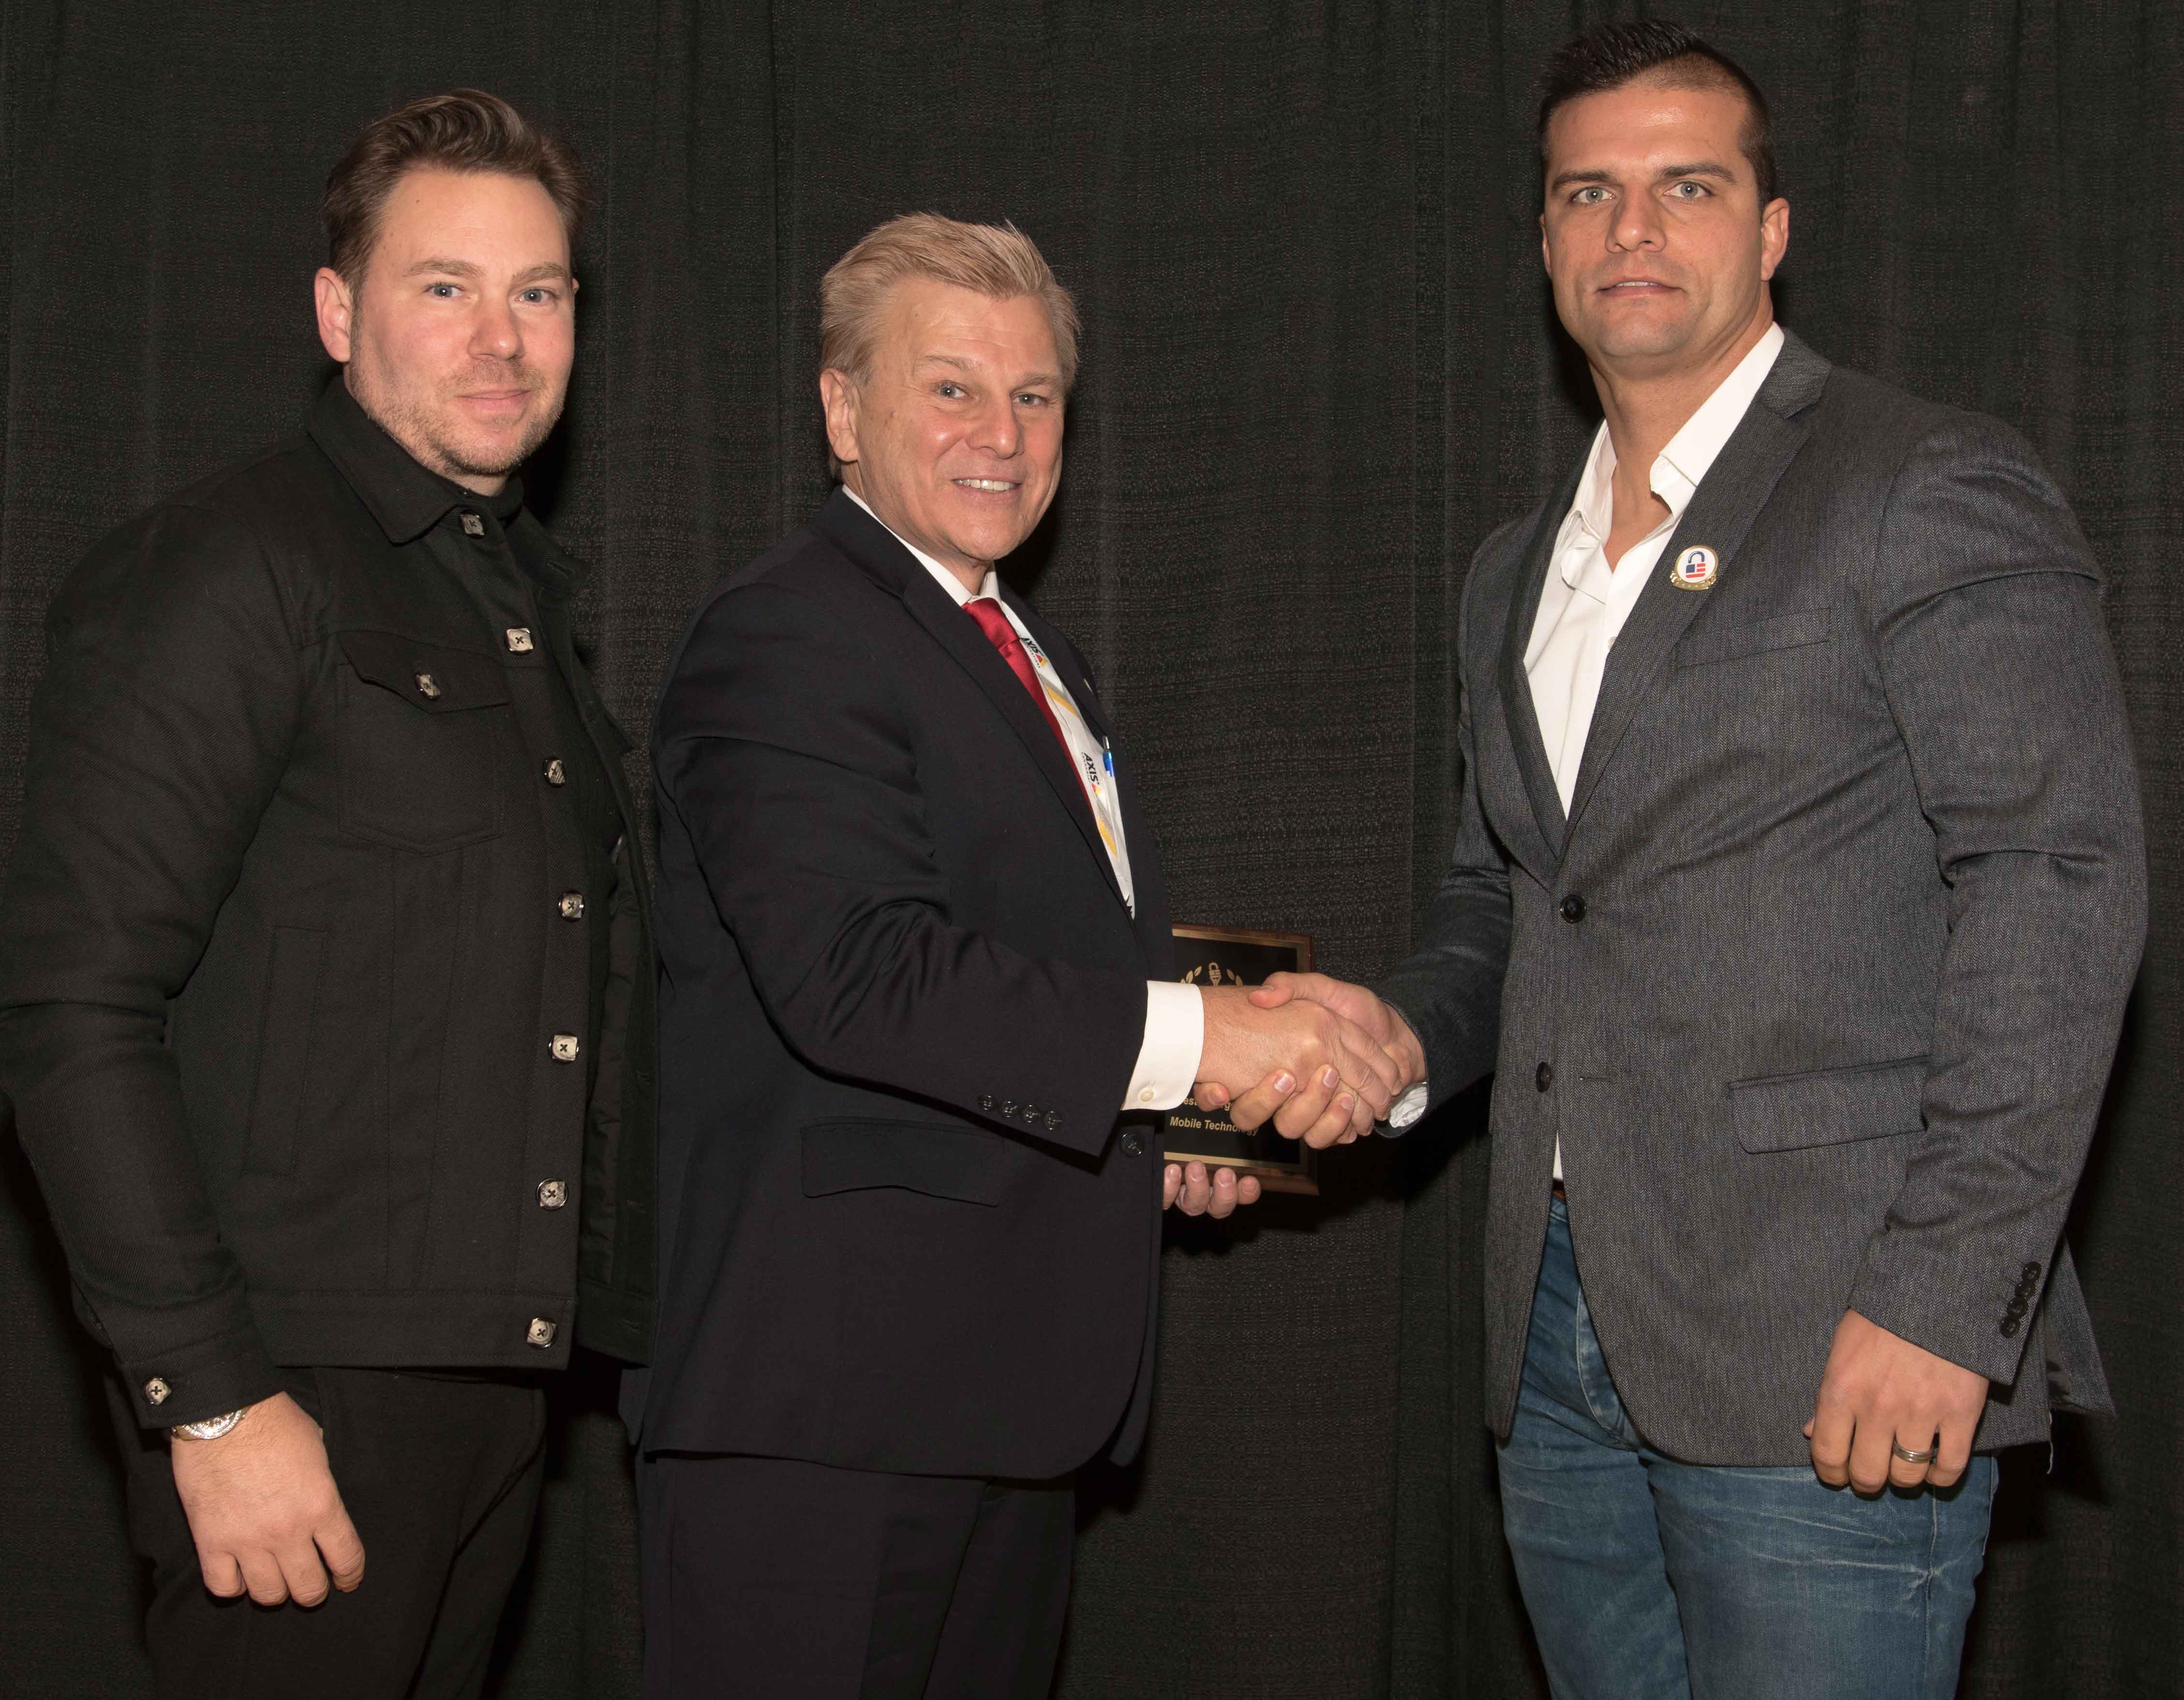 Jaromy Jannard-Pittario, COO (at left), and Barry Oberholzer, CEO (at right), Co-Founders of Royal Holdings, being presented a 2017 ‘ASTORS’ Homeland Security Award at ISC East.